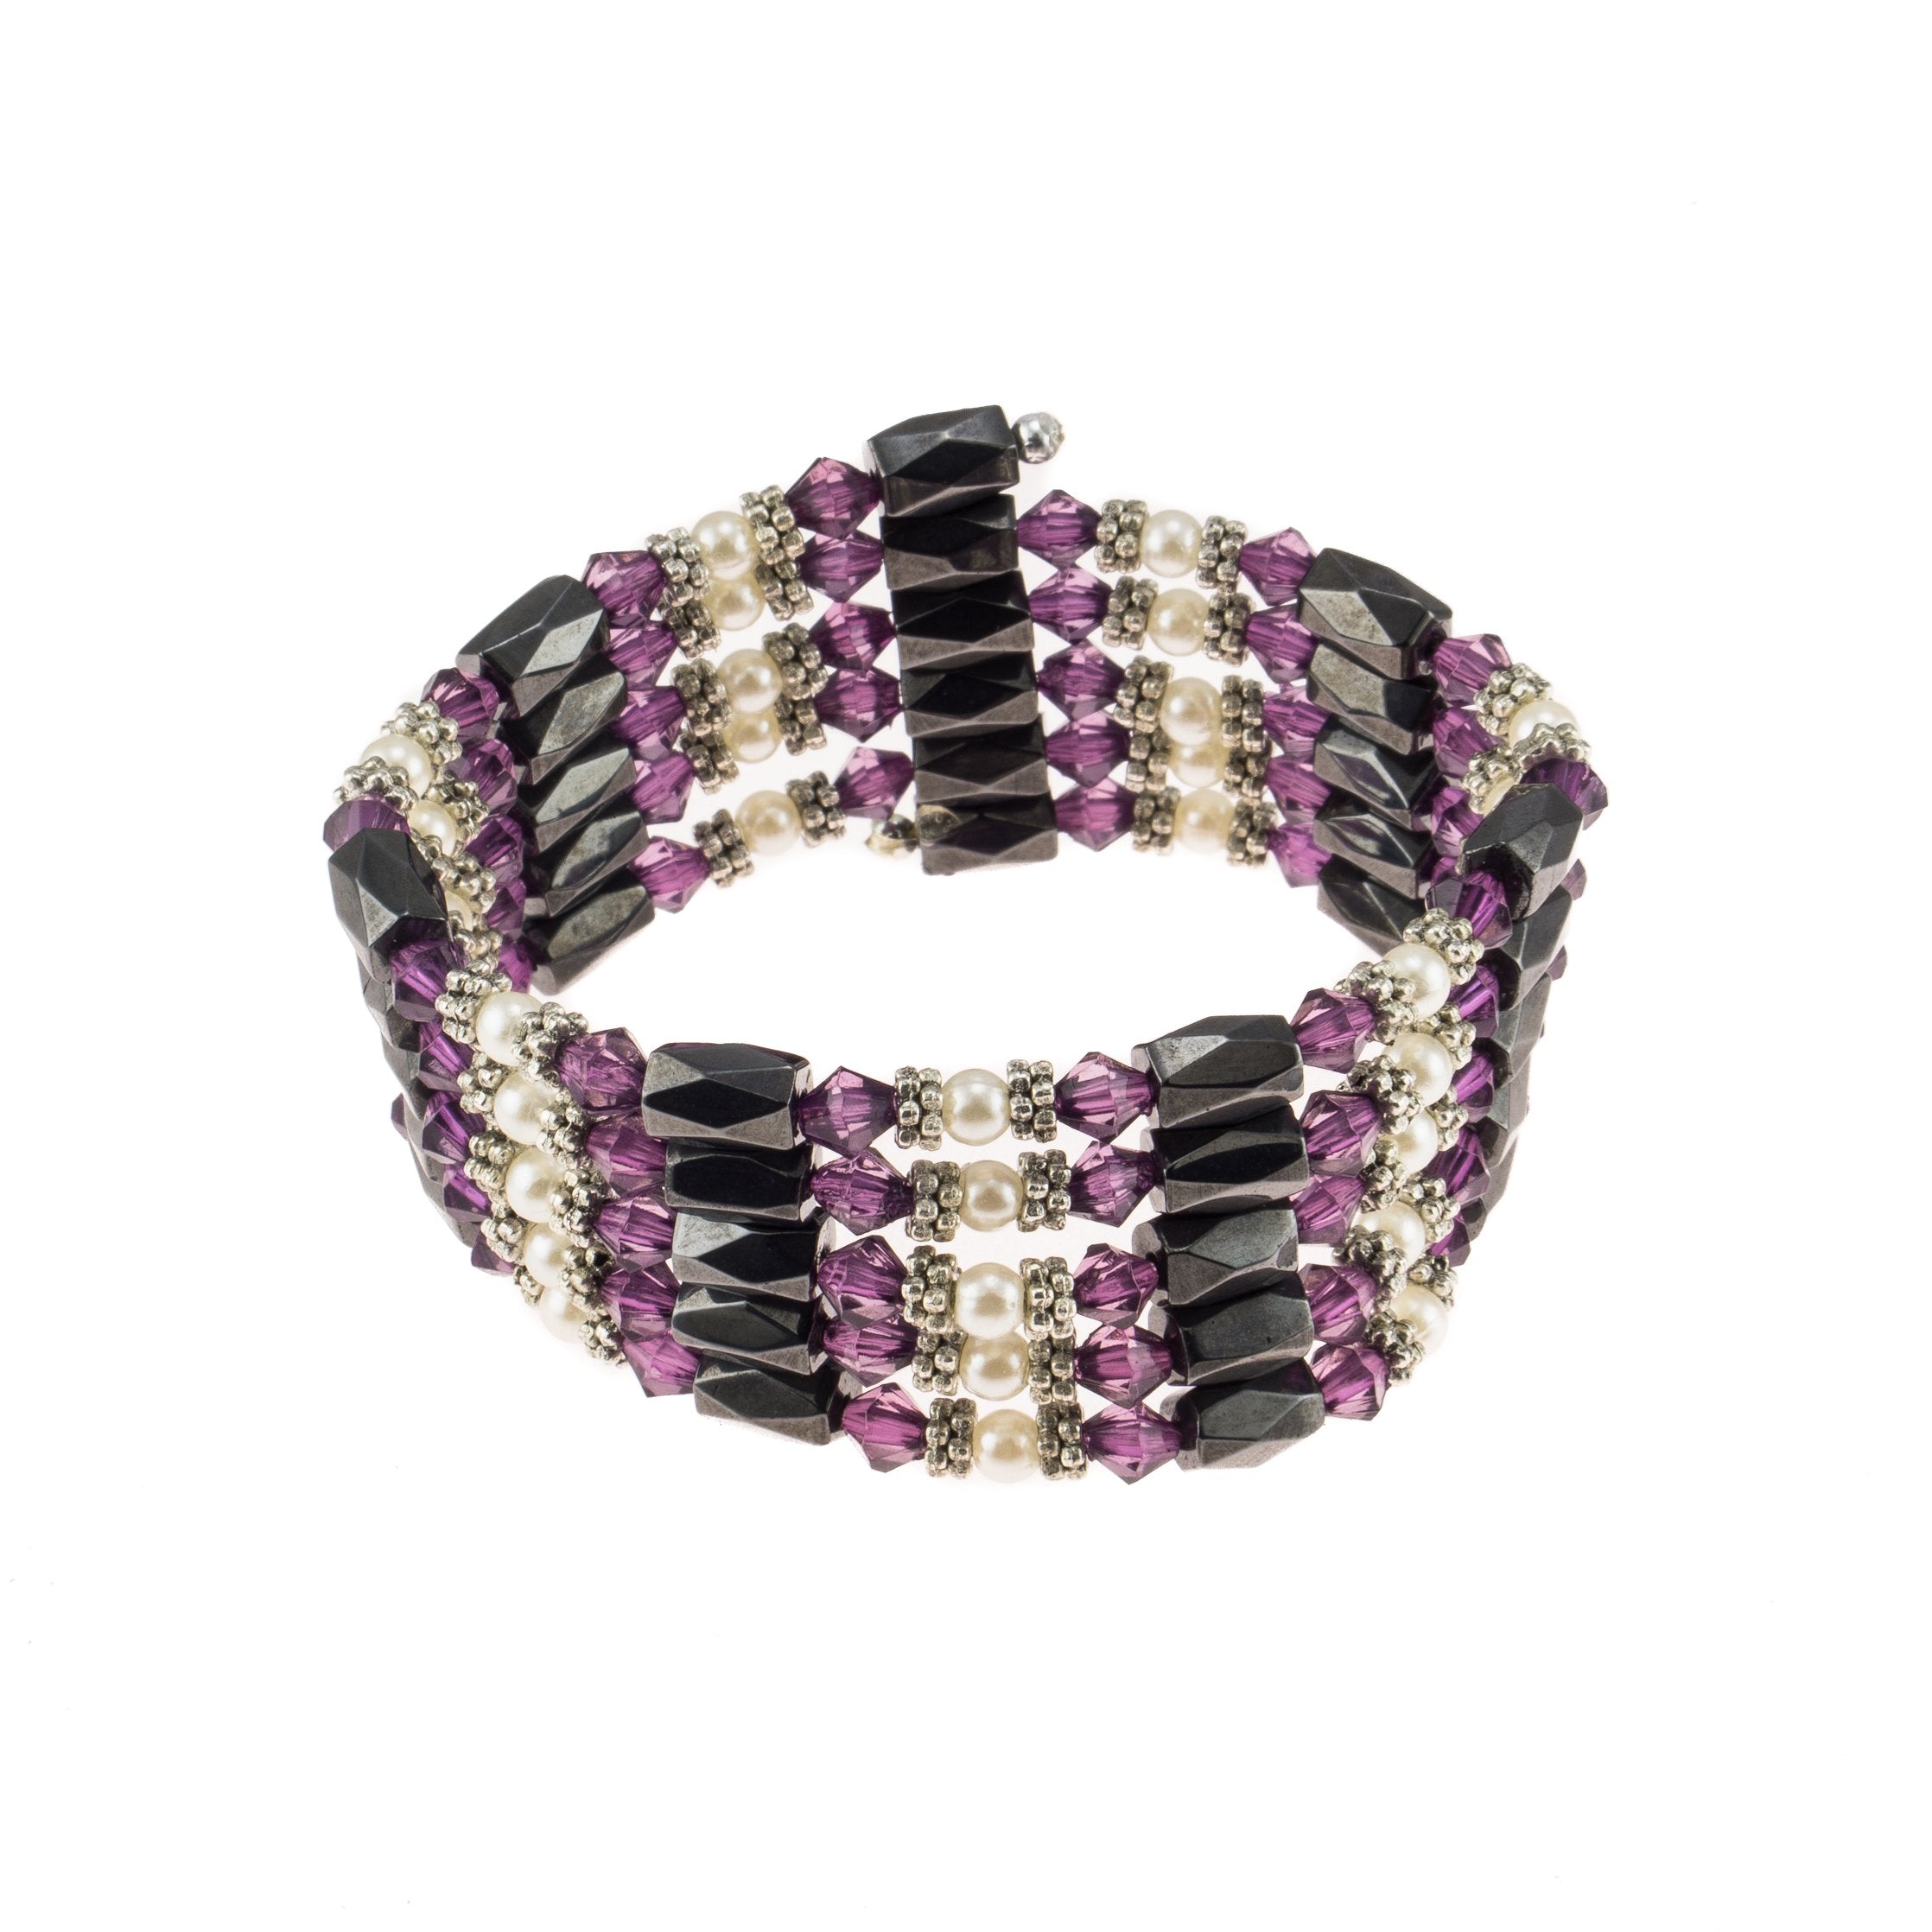 Magnetic Hematite Beaded Wrap Bracelet, Anklet or Necklace with Genuine Fresh Water Pearls (Purple)